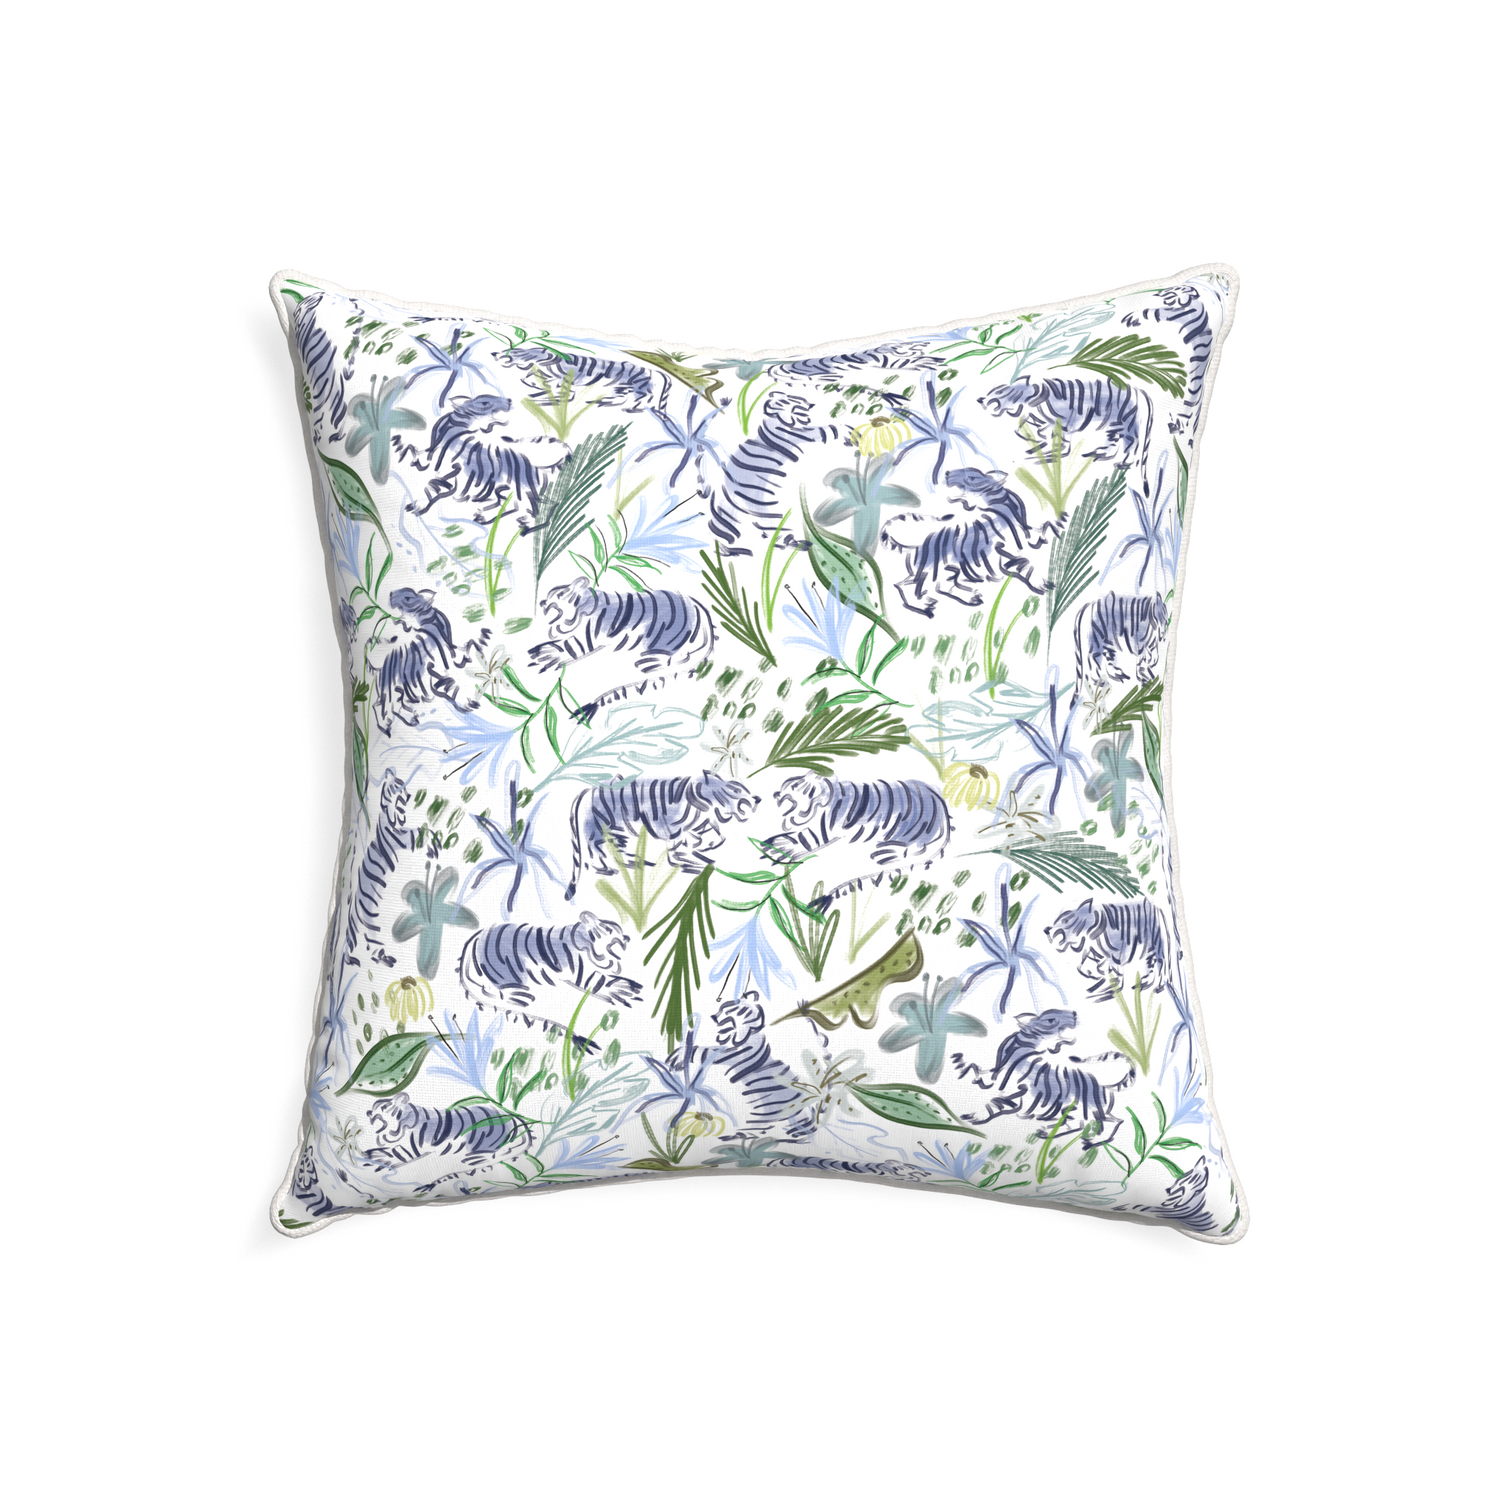 22-square frida green custom green tigerpillow with snow piping on white background